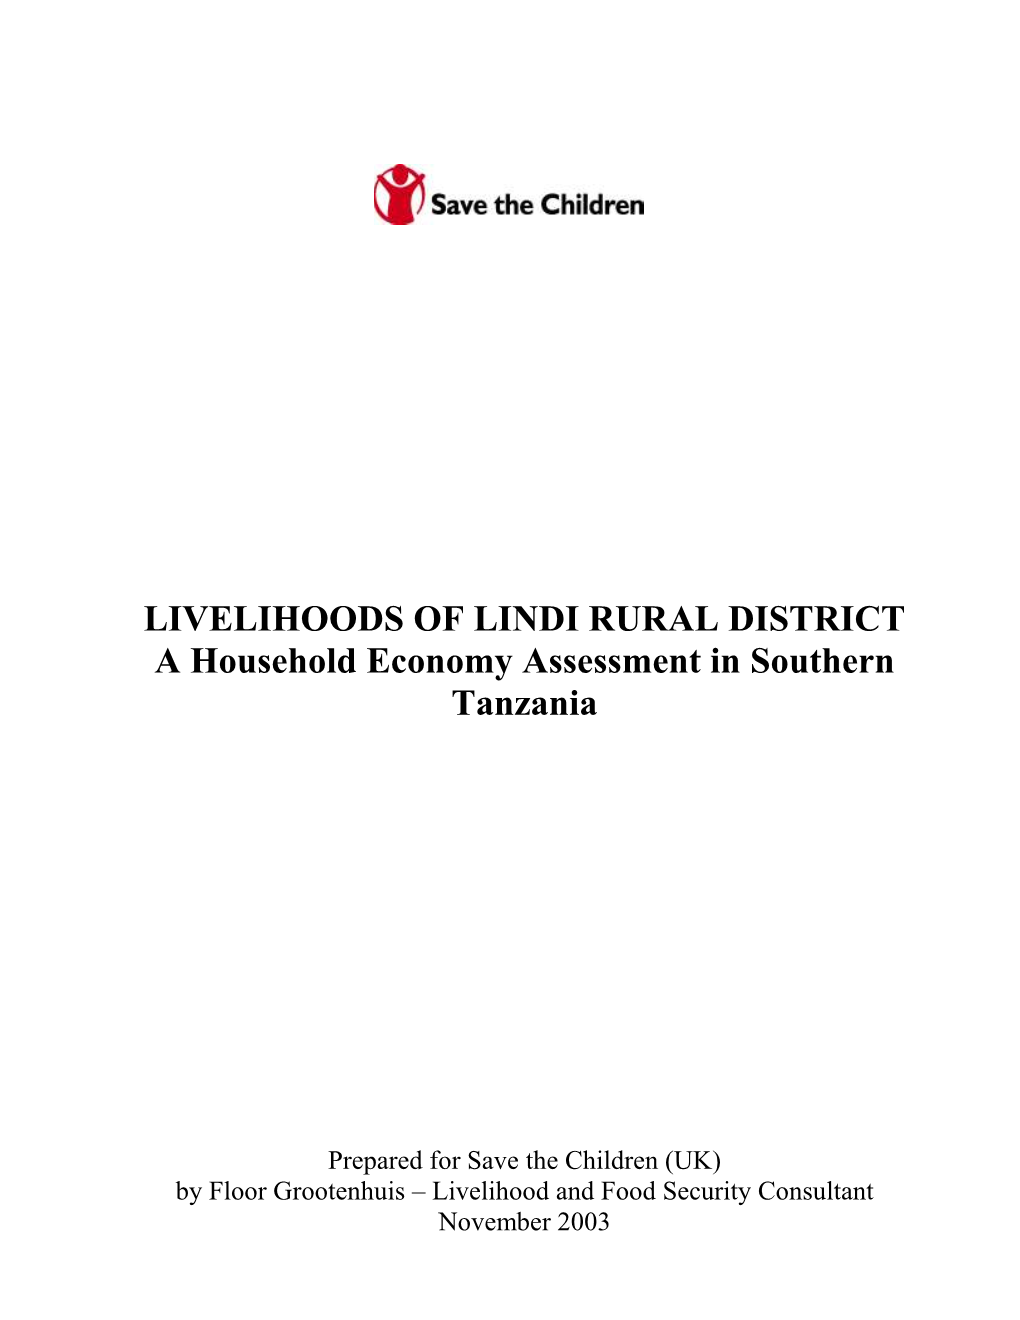 LIVELIHOODS of LINDI RURAL DISTRICT a Household Economy Assessment in Southern Tanzania